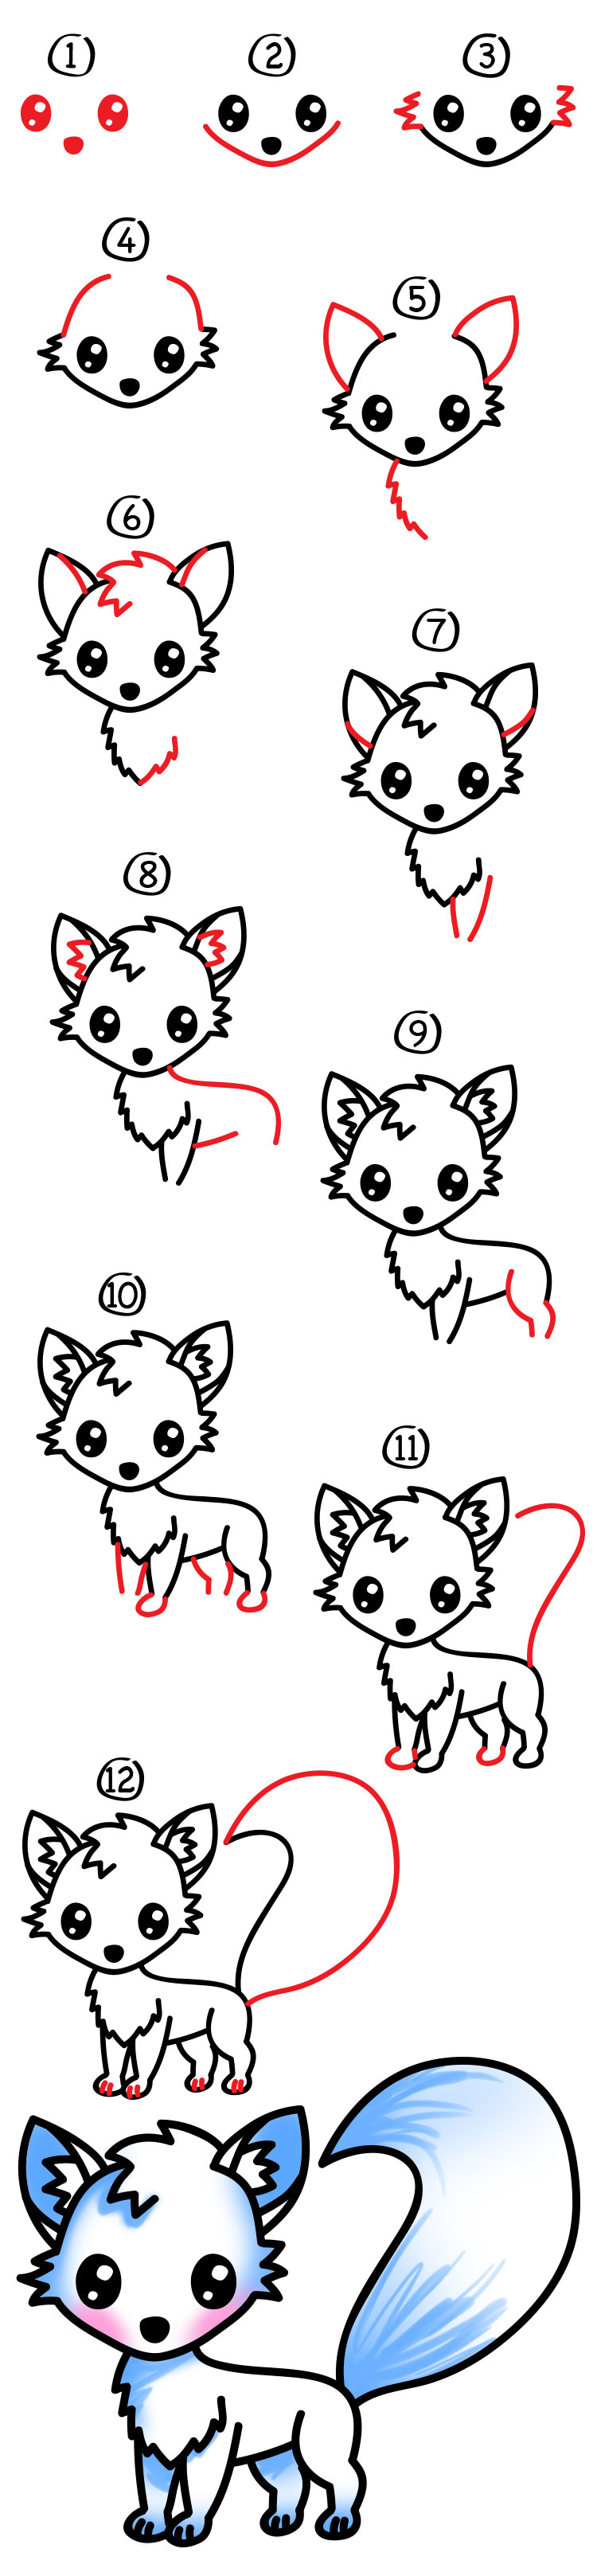 How To Draw An Arctic Fox - Art For Kids Hub